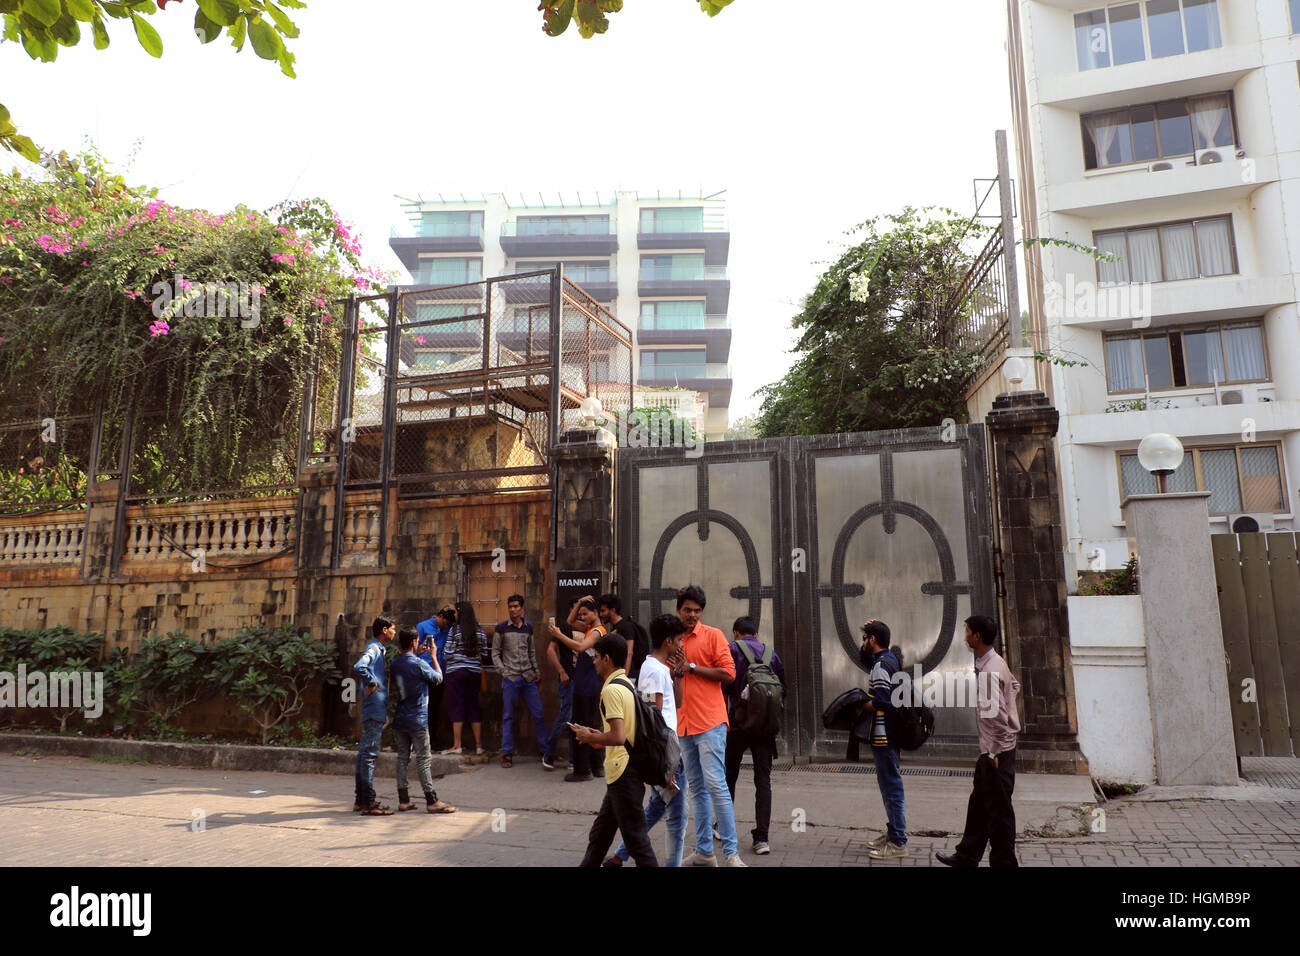 Bollywood super star Shahrukh Khan’s house Mannat situated in Bandra, Mumbai, looks very Victorian and is filled with exquisite furnishings. Stock Photo